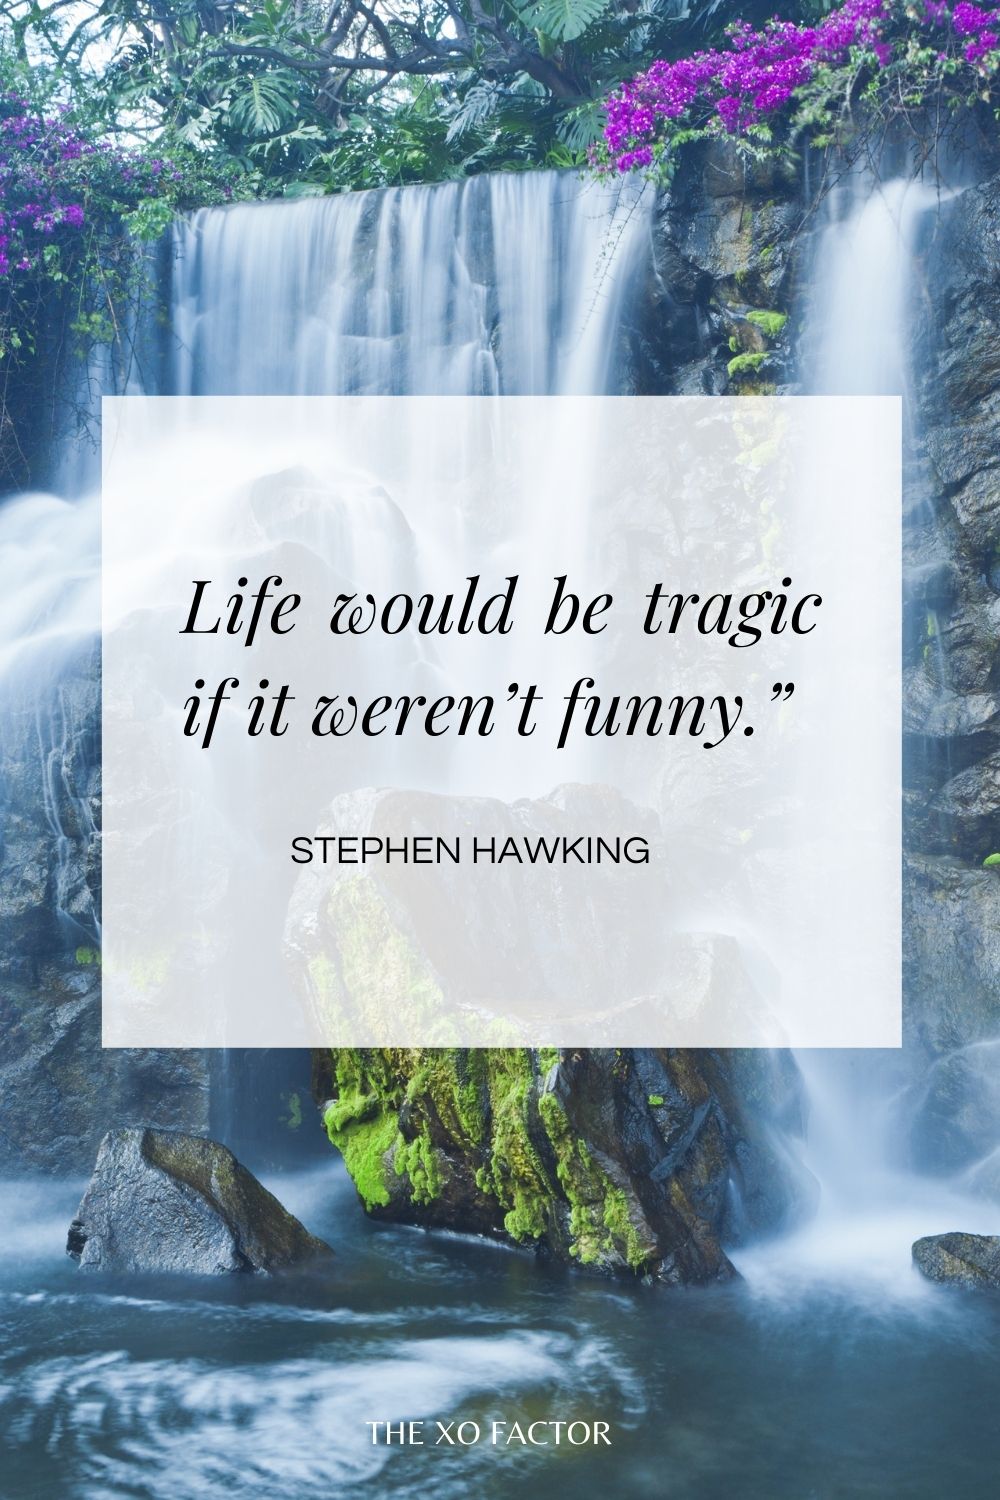 Life would be tragic if it weren’t funny.”  Stephen Hawking